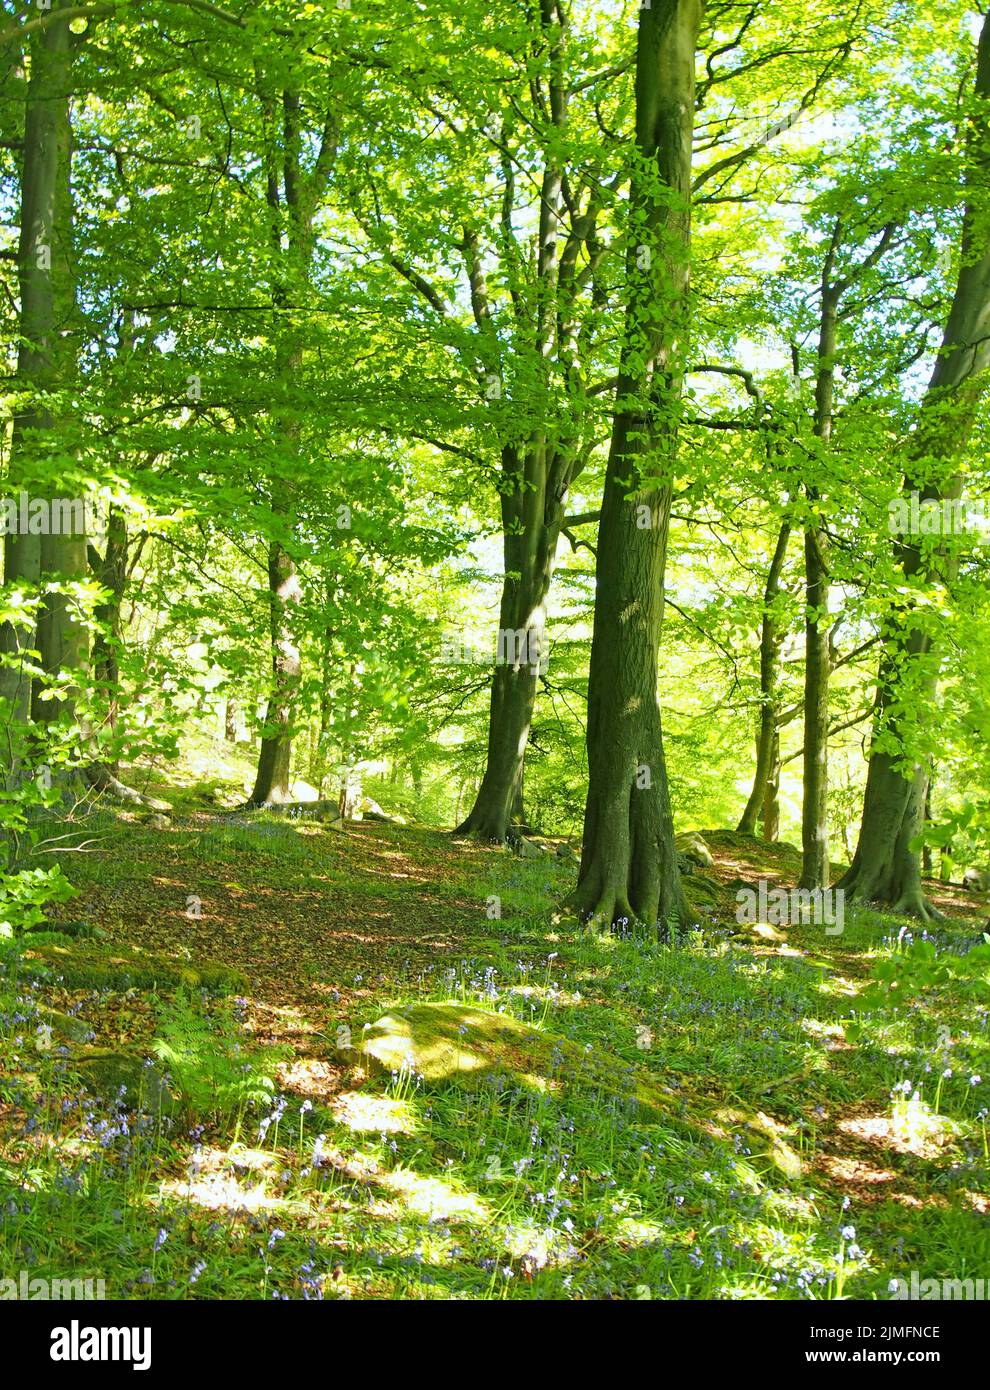 Springtime woodland with large beech trees with bright green glowing leaves illuminated by bright morning sunshine and bluebells Stock Photo